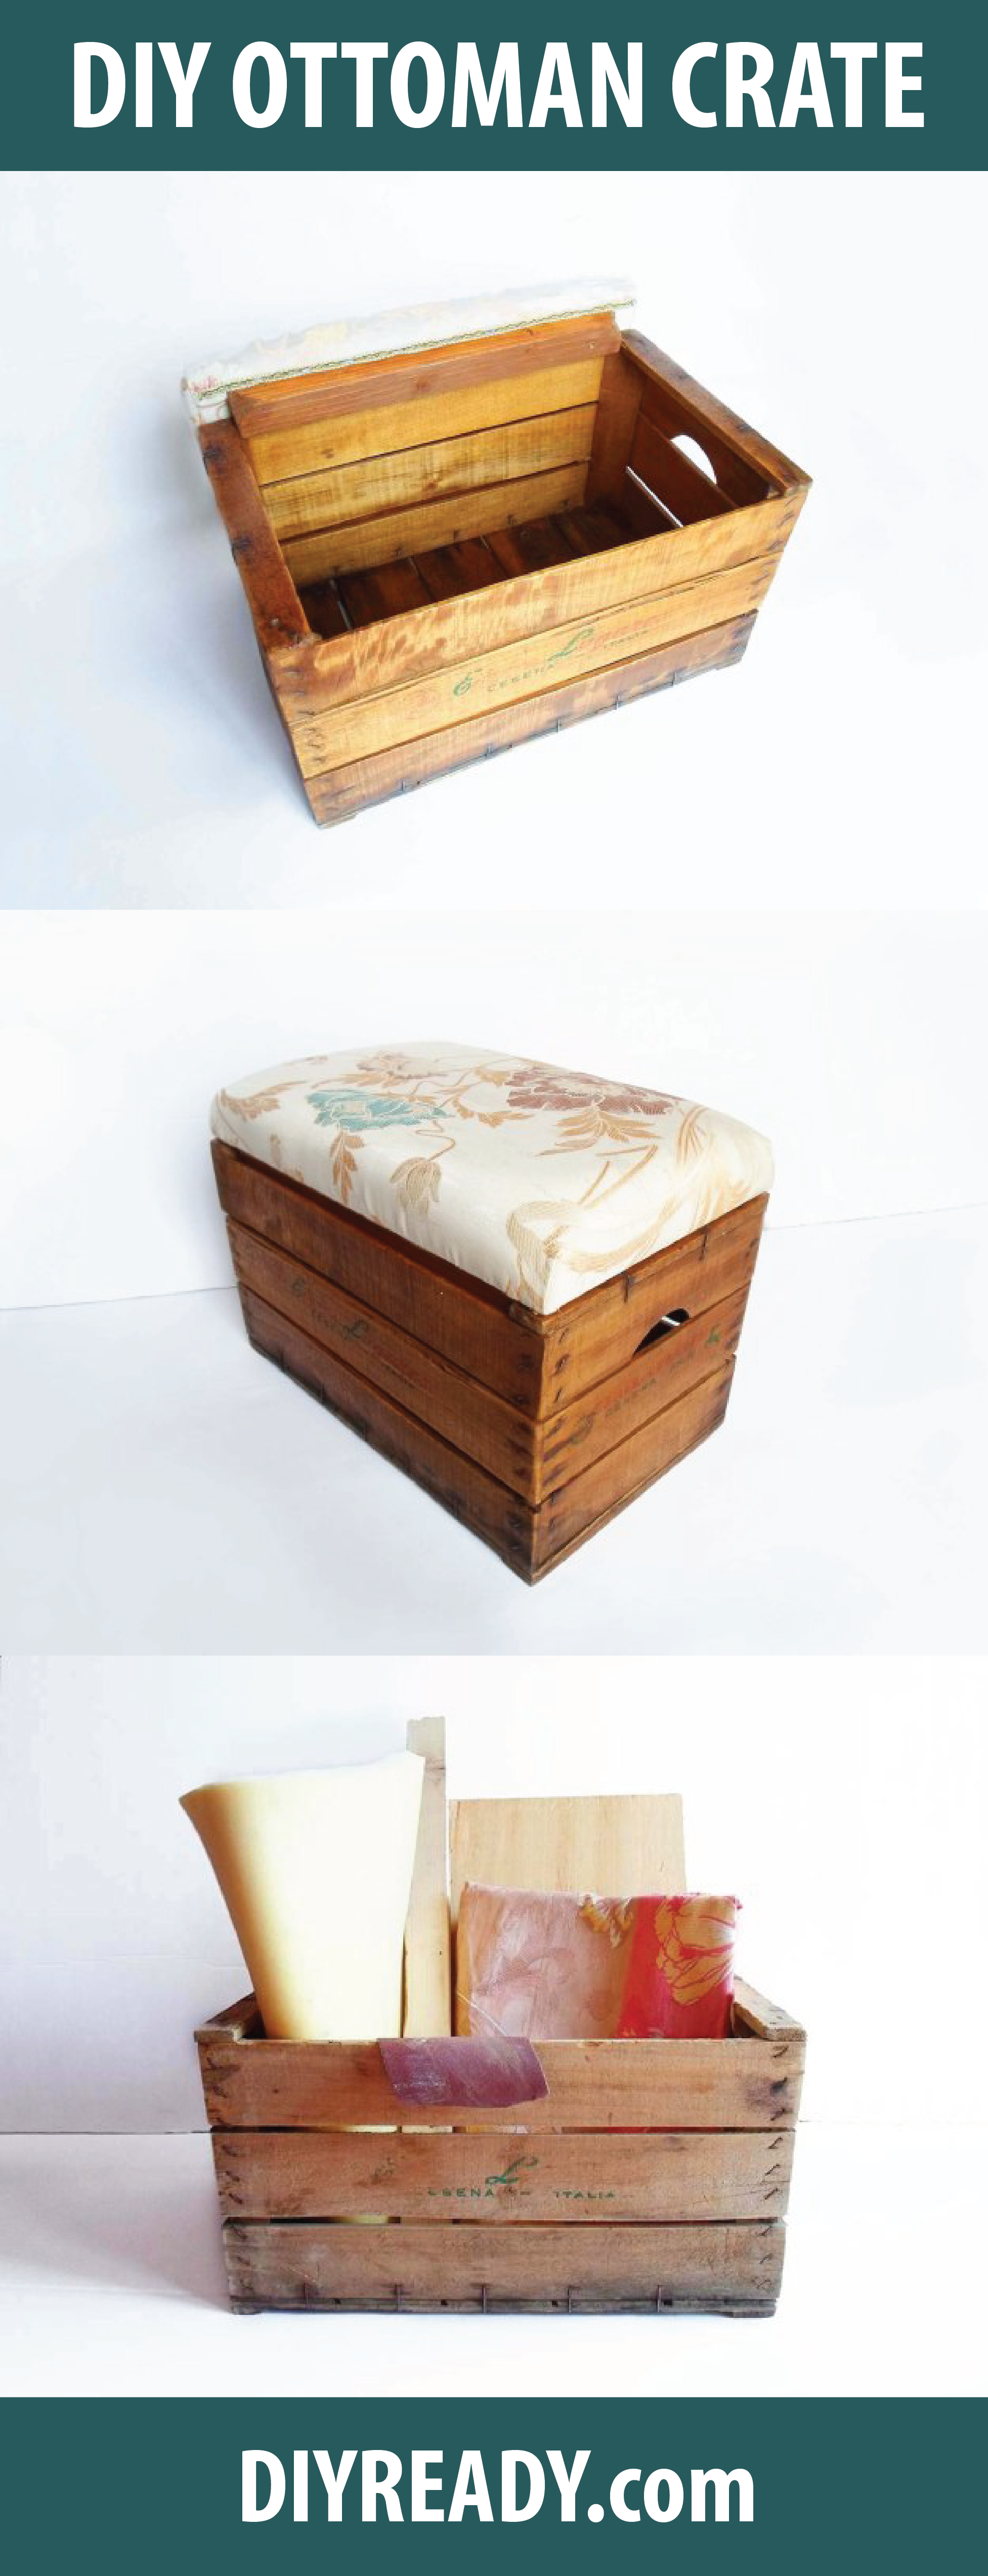 Check out DIY Storage Ottoman | Turn a Vintage Wooden Crate Into a Storage Ottoman at https://diyprojects.com/storage-ottoman/